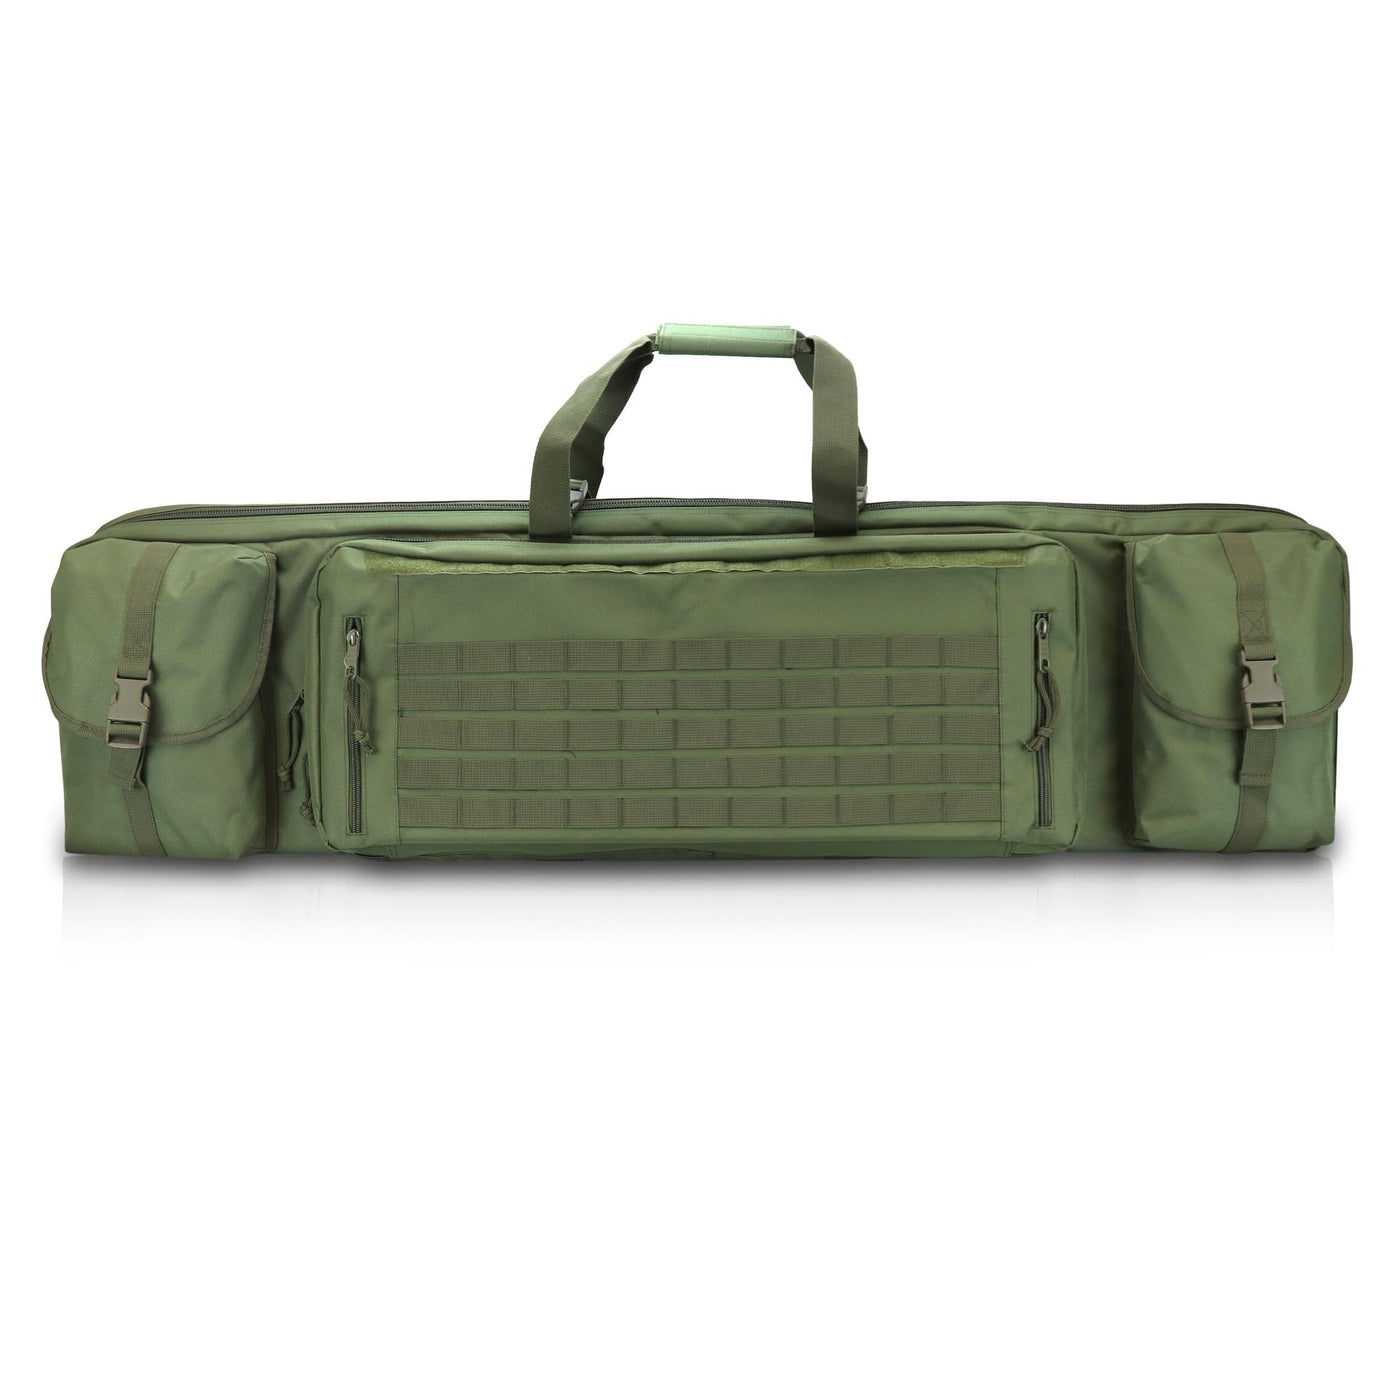 Osage River Osage River 36 in Double Rifle Case OD Green Shooting